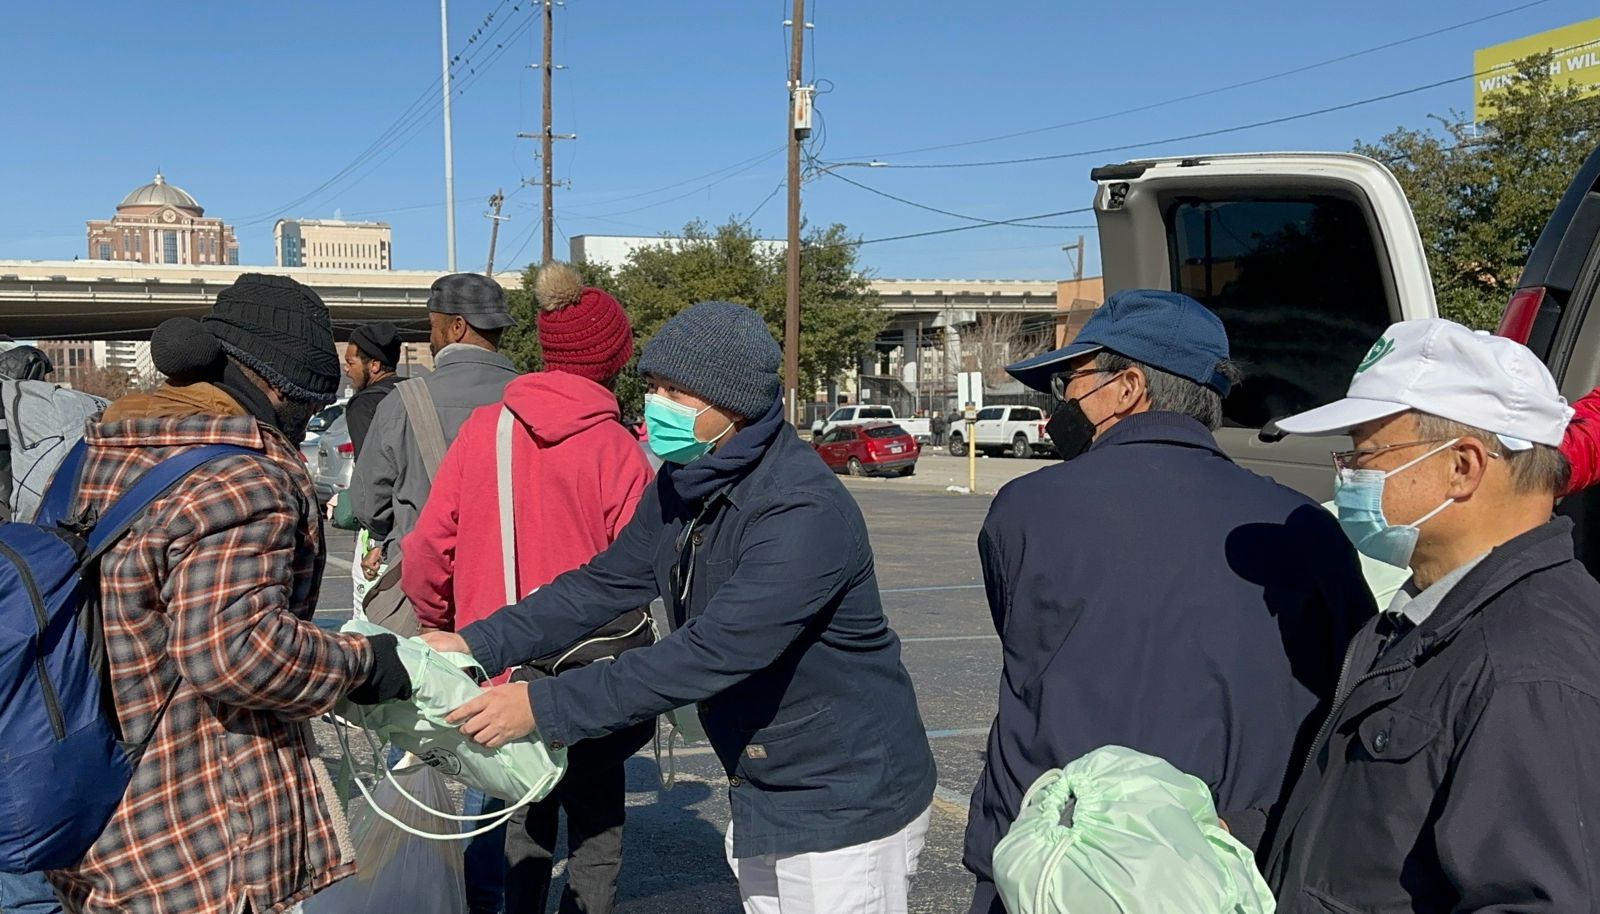 The volunteers respectfully presented environmentally friendly blankets and supplies, and wished everyone a safe passage through the severe cold.